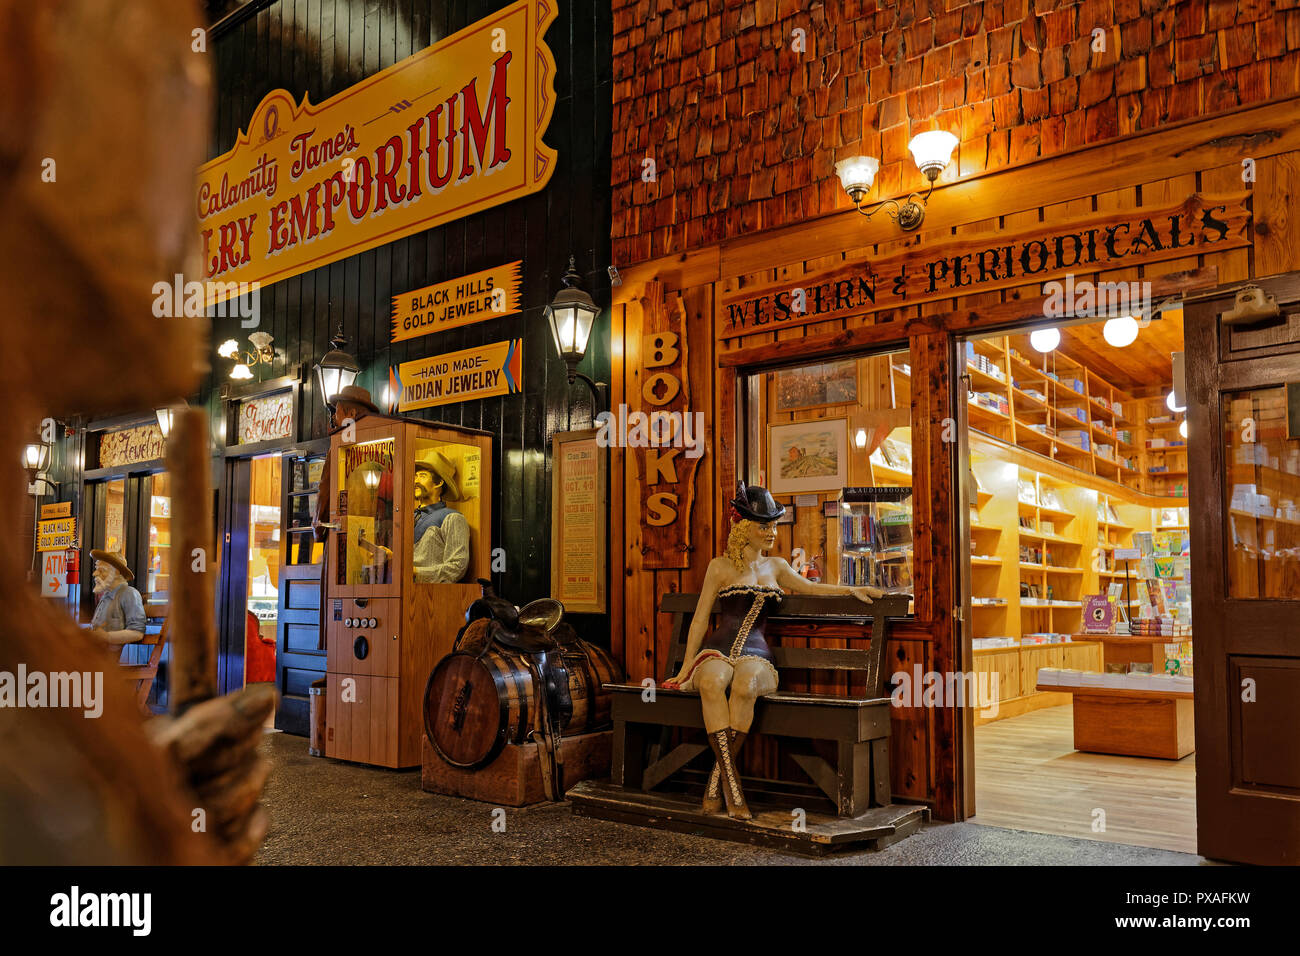 WALL, SOUTH DAKOTA, September 15, 2018 : Inside the Wall Drug Store, both a drugstore and a touristic attraction in the town center of Wall, South Dak Stock Photo